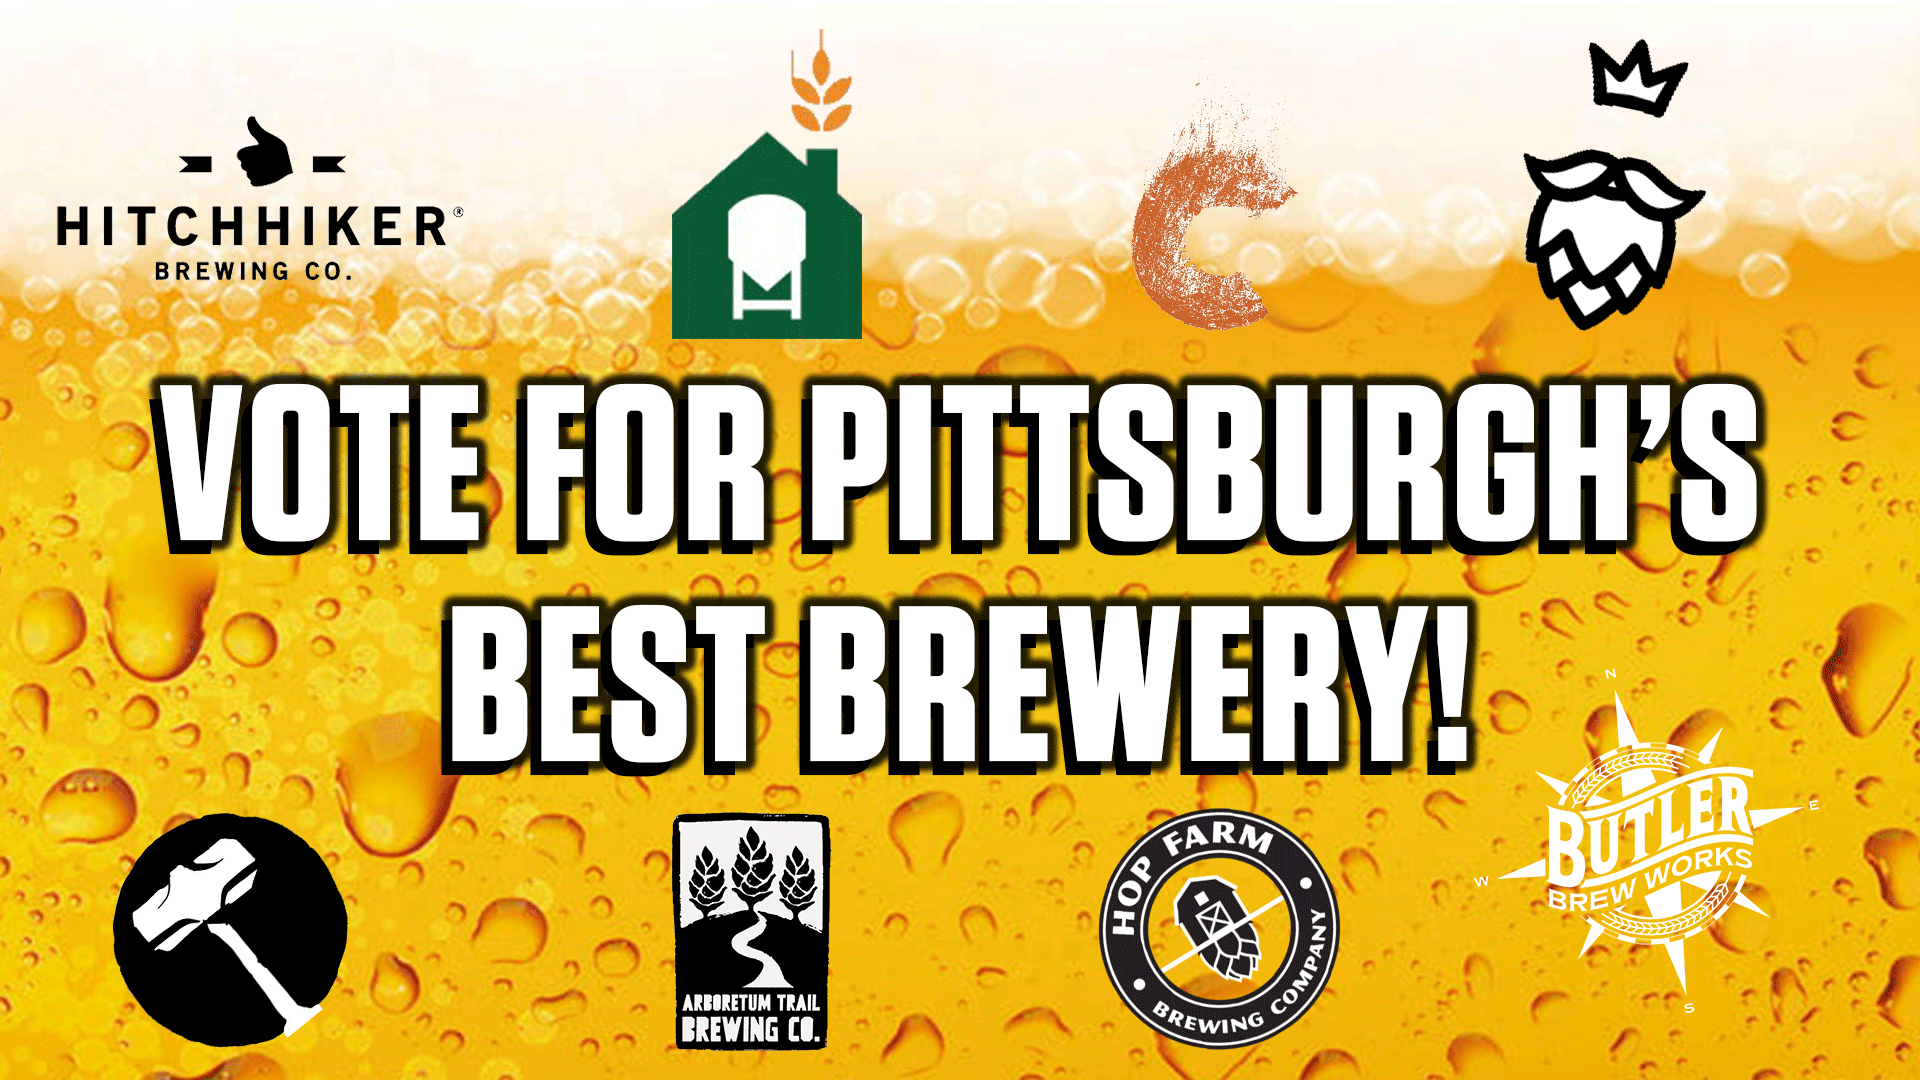 tasty-8-full-size-hampton-beer-outlet-pittsburgh-brewery-vote